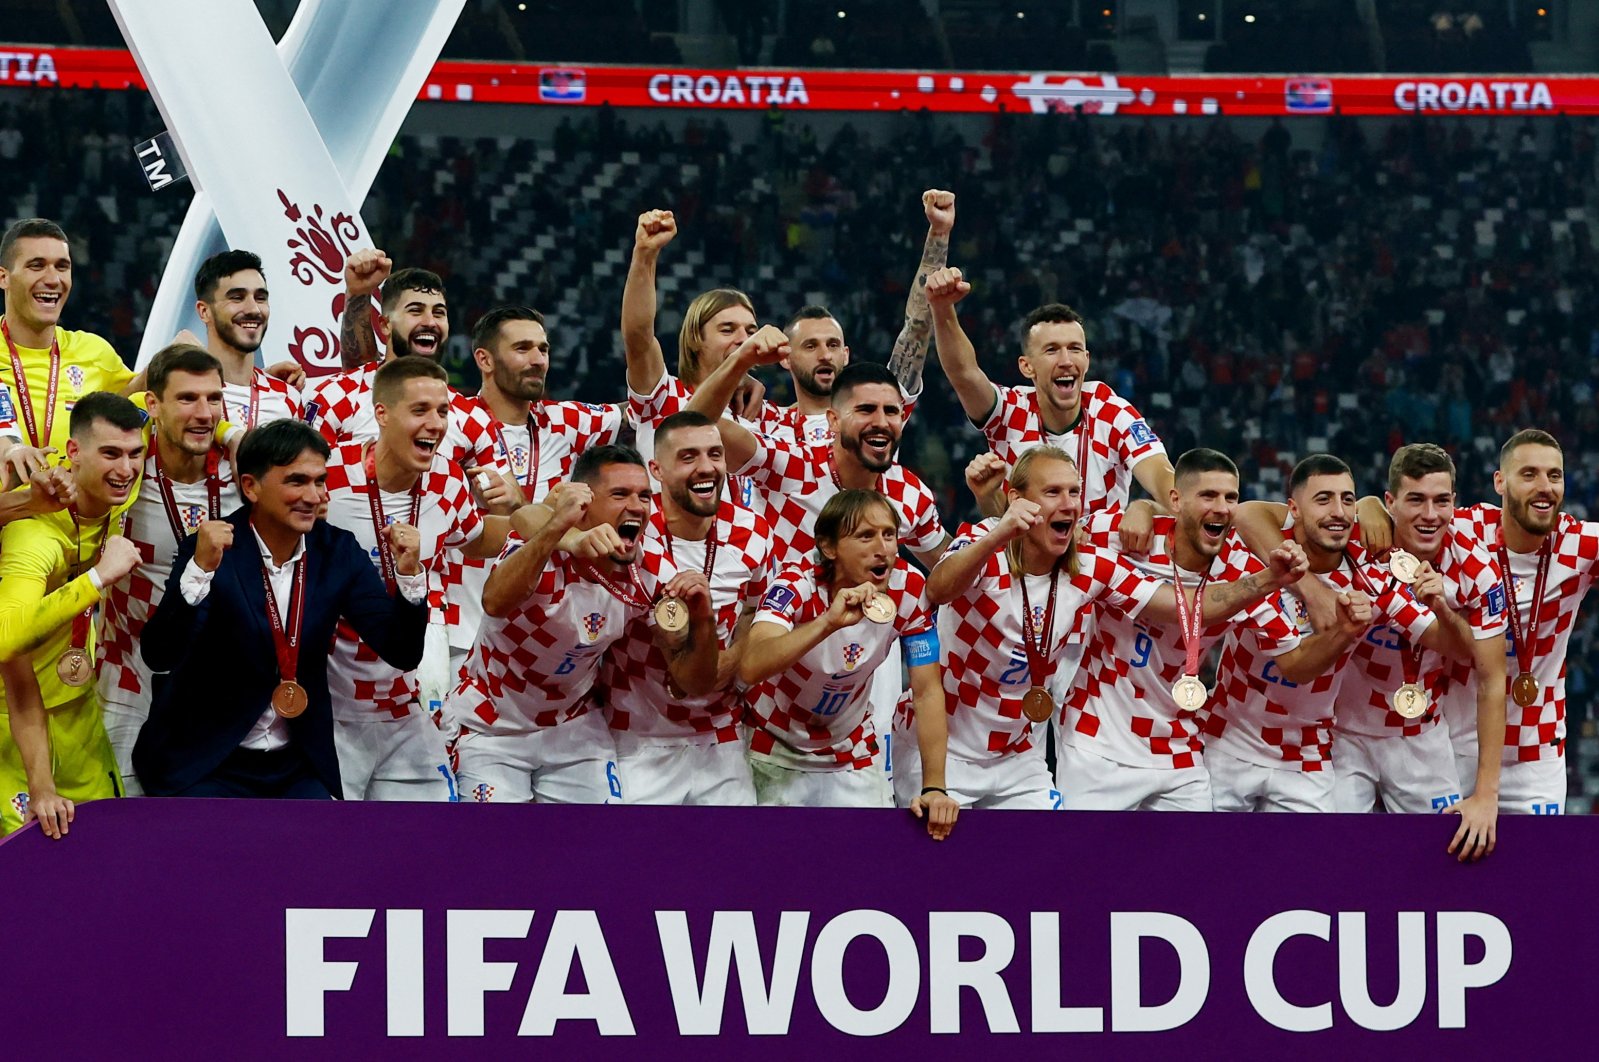 Croatia players celebrate on stage after FIFA World Cup Qatar 2022 Third-Place Playoff match between Croatia and Morocco, at the Khalifa International Stadium, in Doha, Qatar, Dec. 17, 2022. (Reuters Photo)